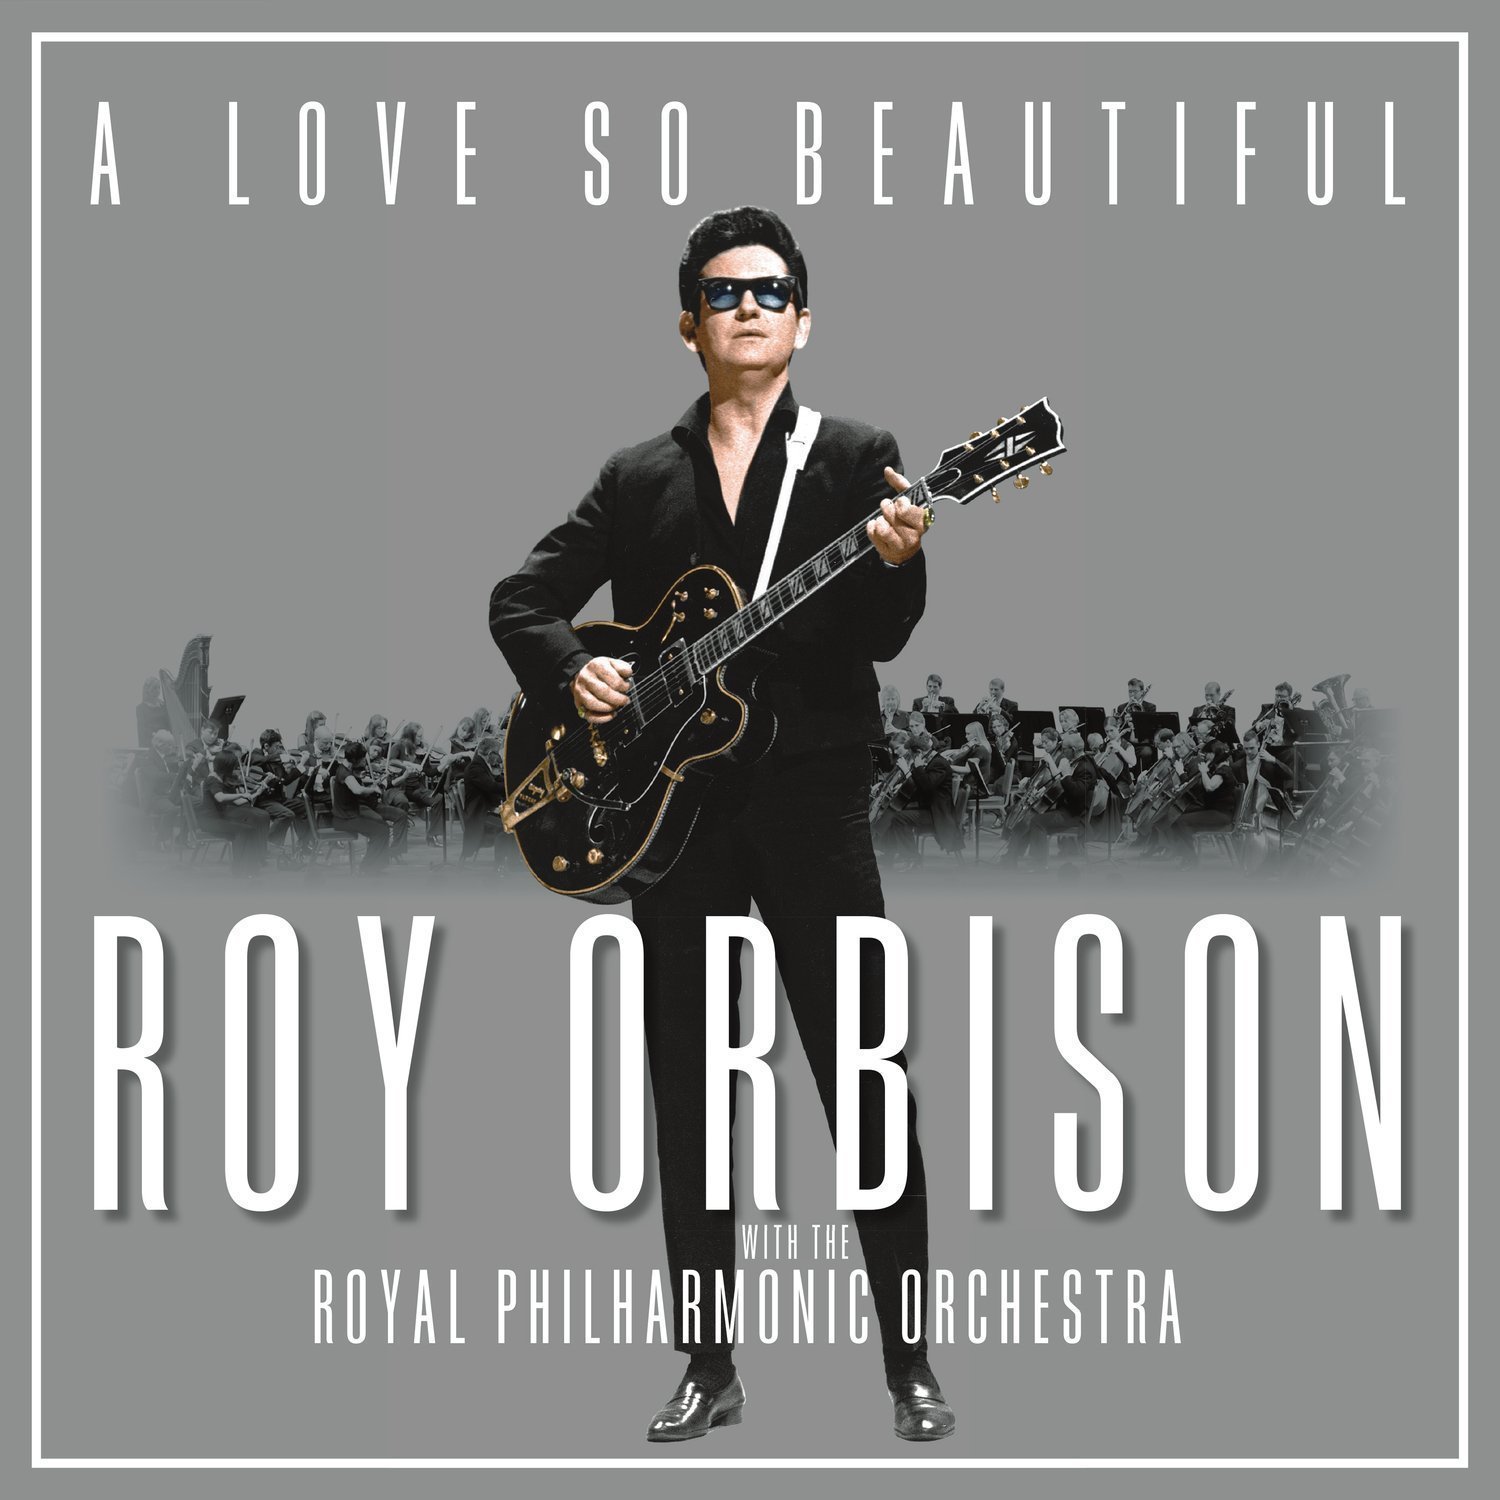 Vinyl Record Roy Orbison A Love So Beautiful: Roy Orbison & the Royal Philharmonic Orchestra (LP)